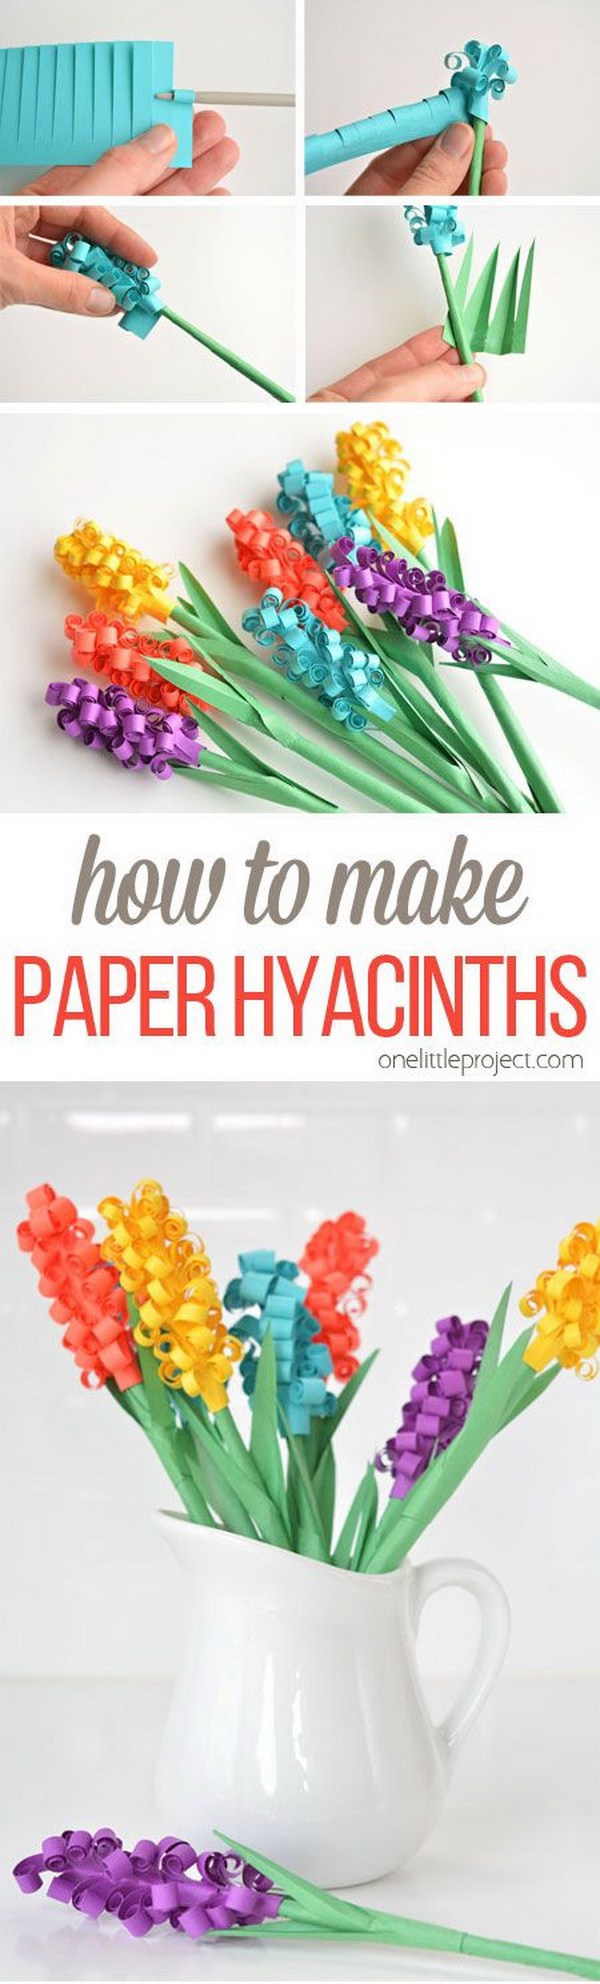 Handmade Paper Hyacinth Flowers: These paper hyacinth flowers are easy to put together and make a gorgeous DIY bouquet! Such a fun spring craft idea!  